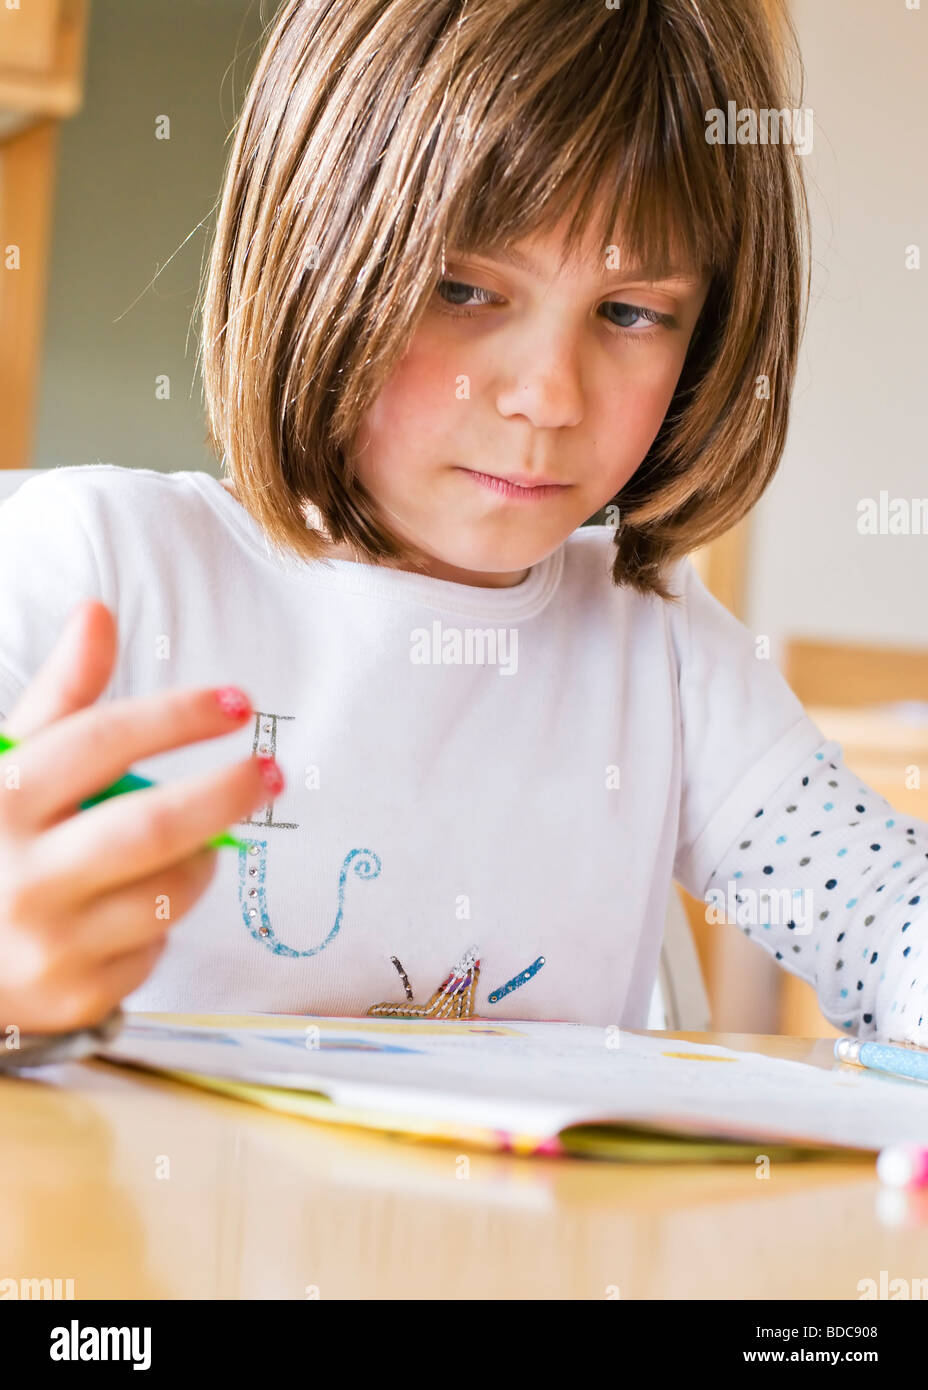 A young girl doing homework sneaks a peek at her fingers to help with her math problem. Stock Photo